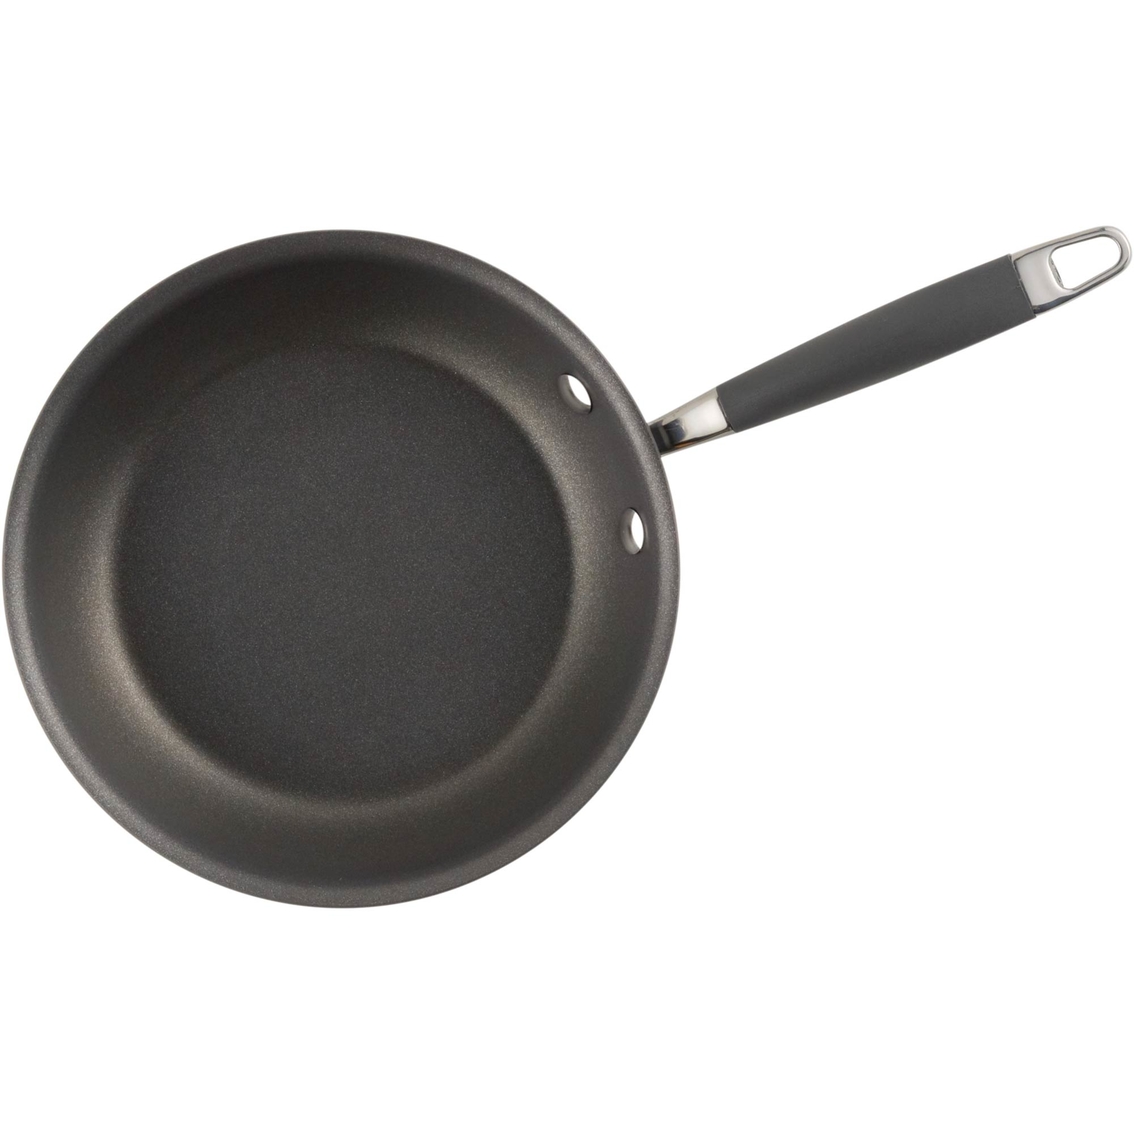 Anolon Advanced Hard Anodized Nonstick 10 in. and 12 in. French Skillet Twin Pack - Image 2 of 4